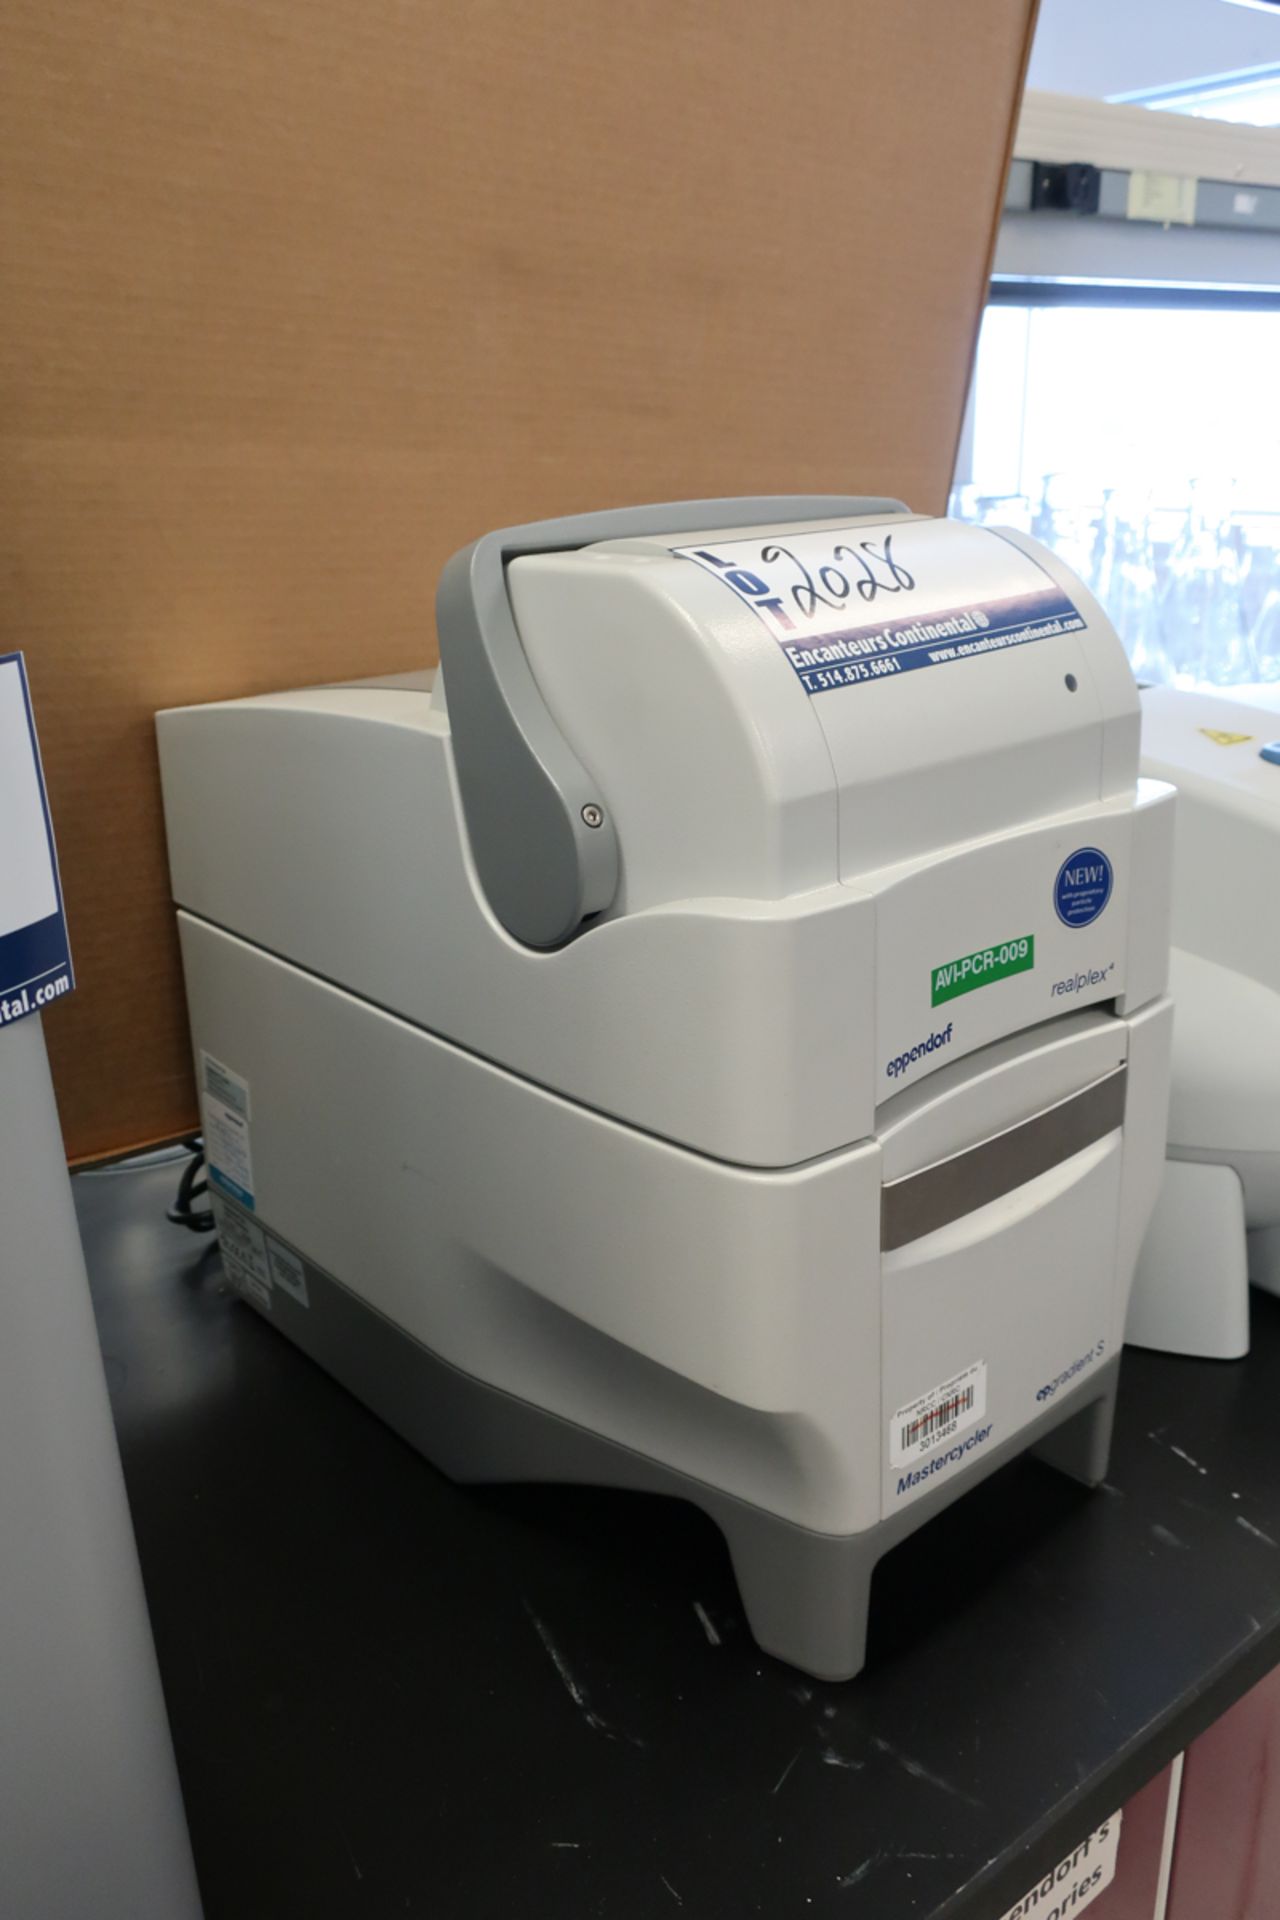 EPPENDORF REALPLEX 4 qPCR REAL TIME CYCLER - Image 2 of 3